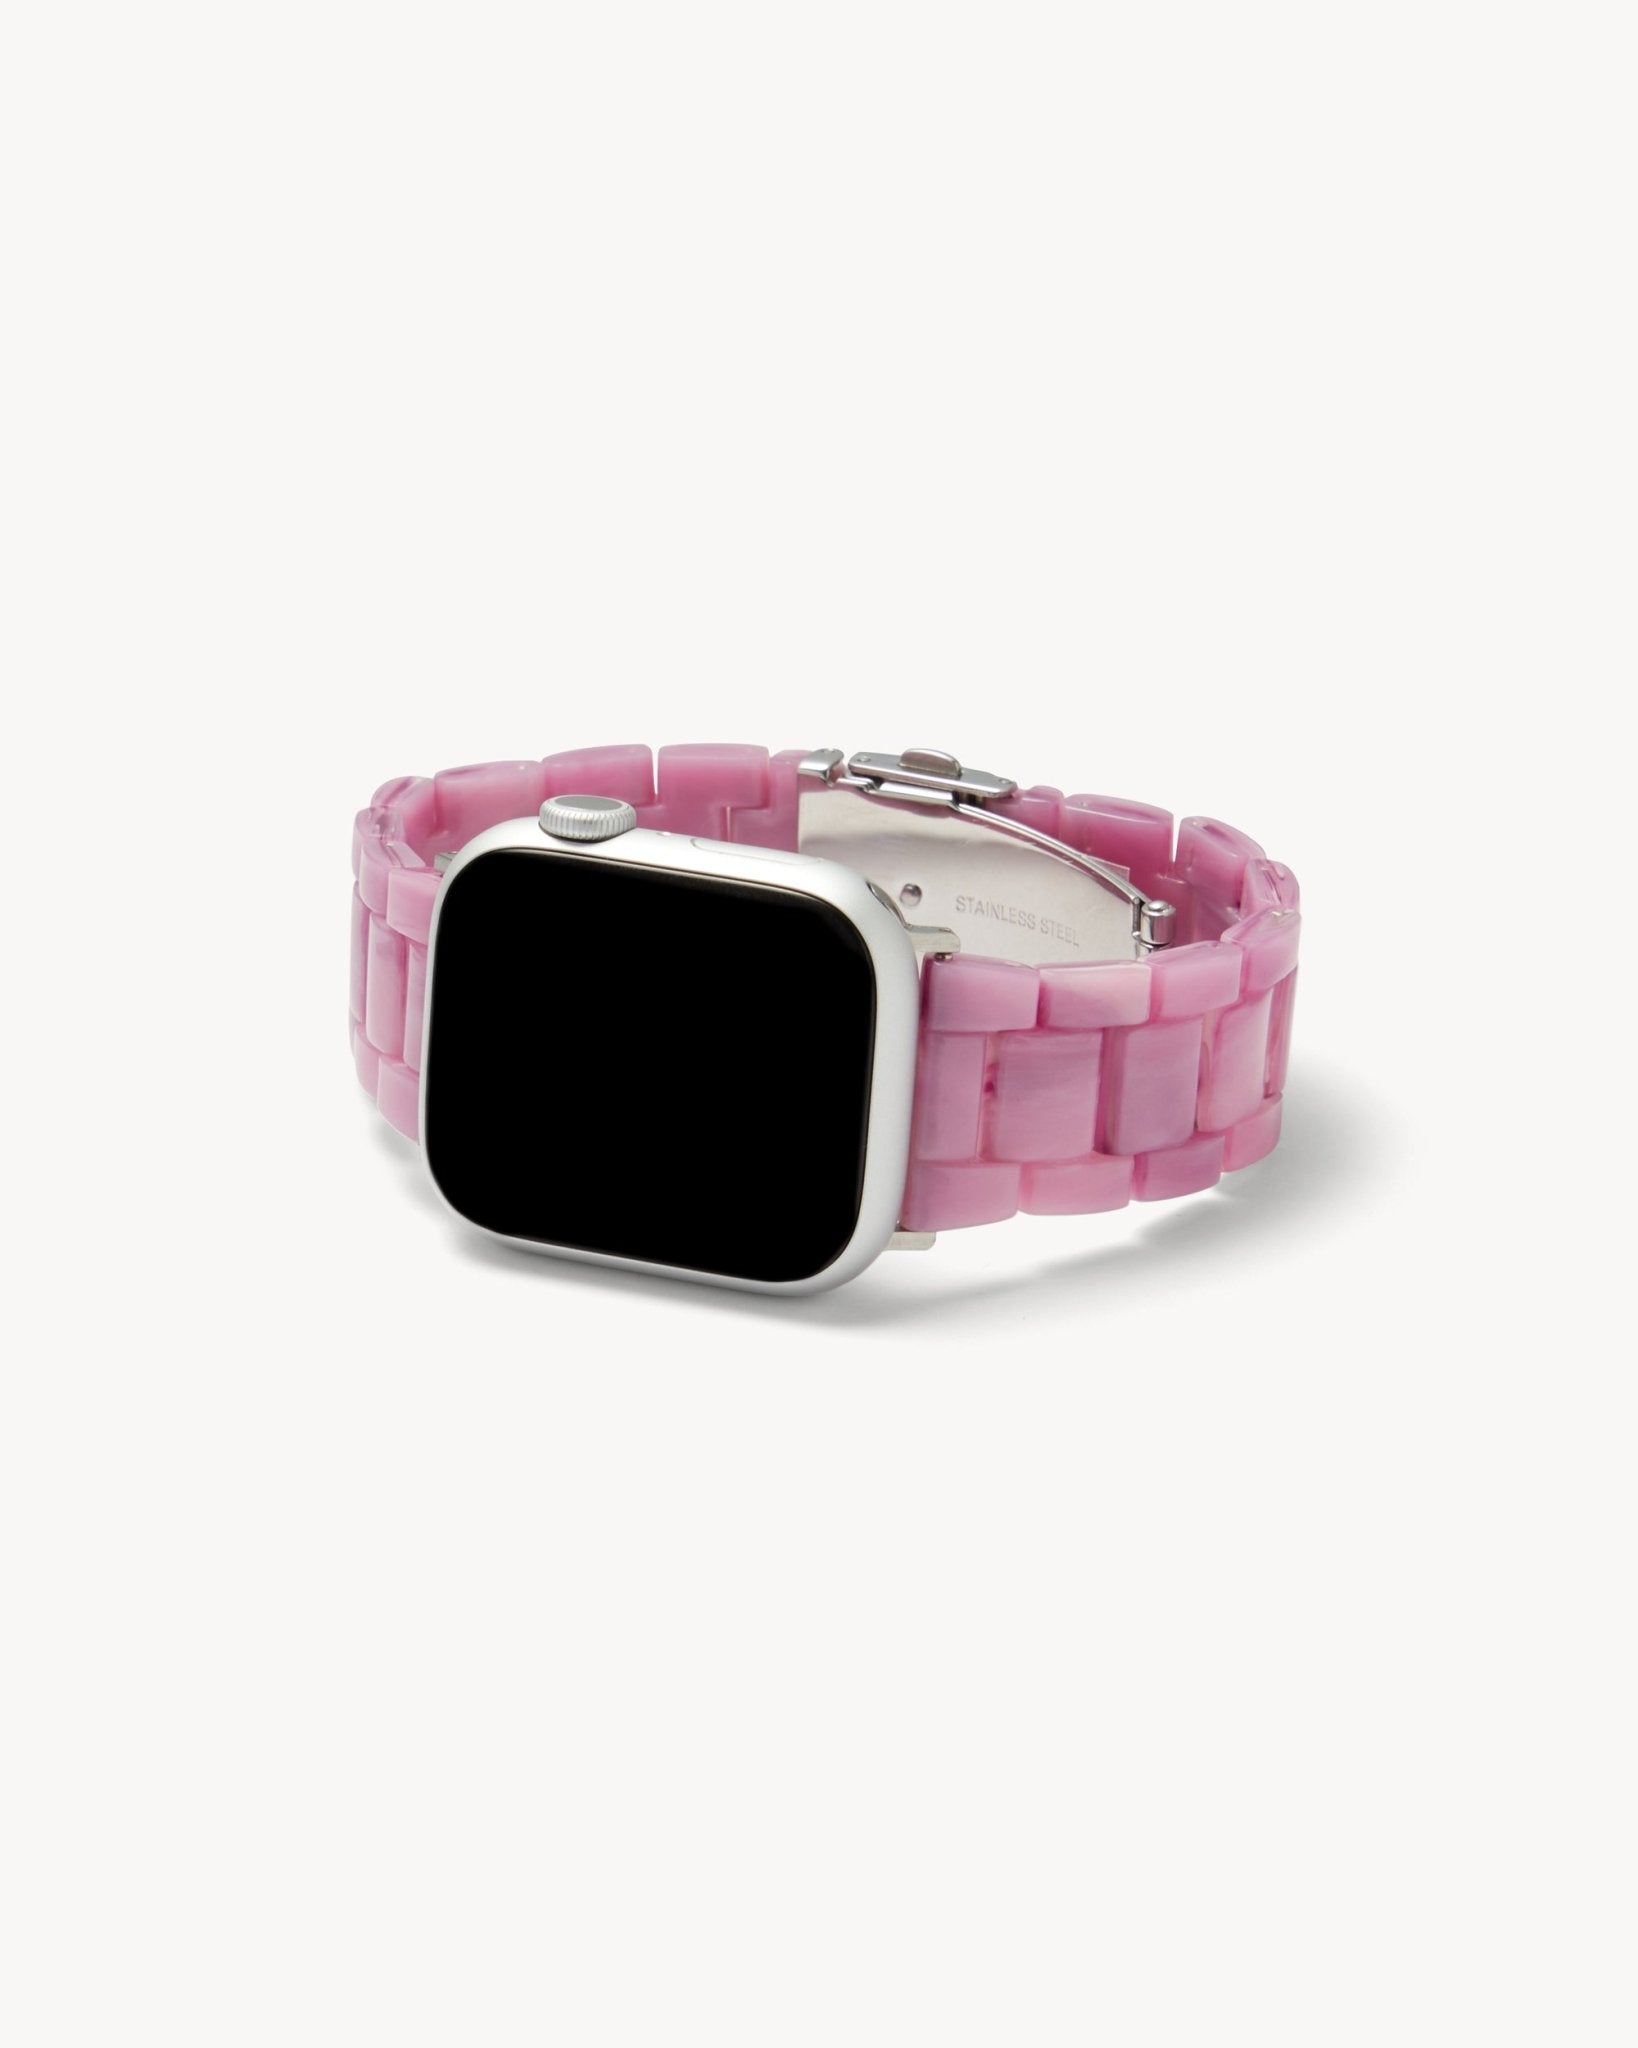 MACHETE Apple Watch Band in Orchid